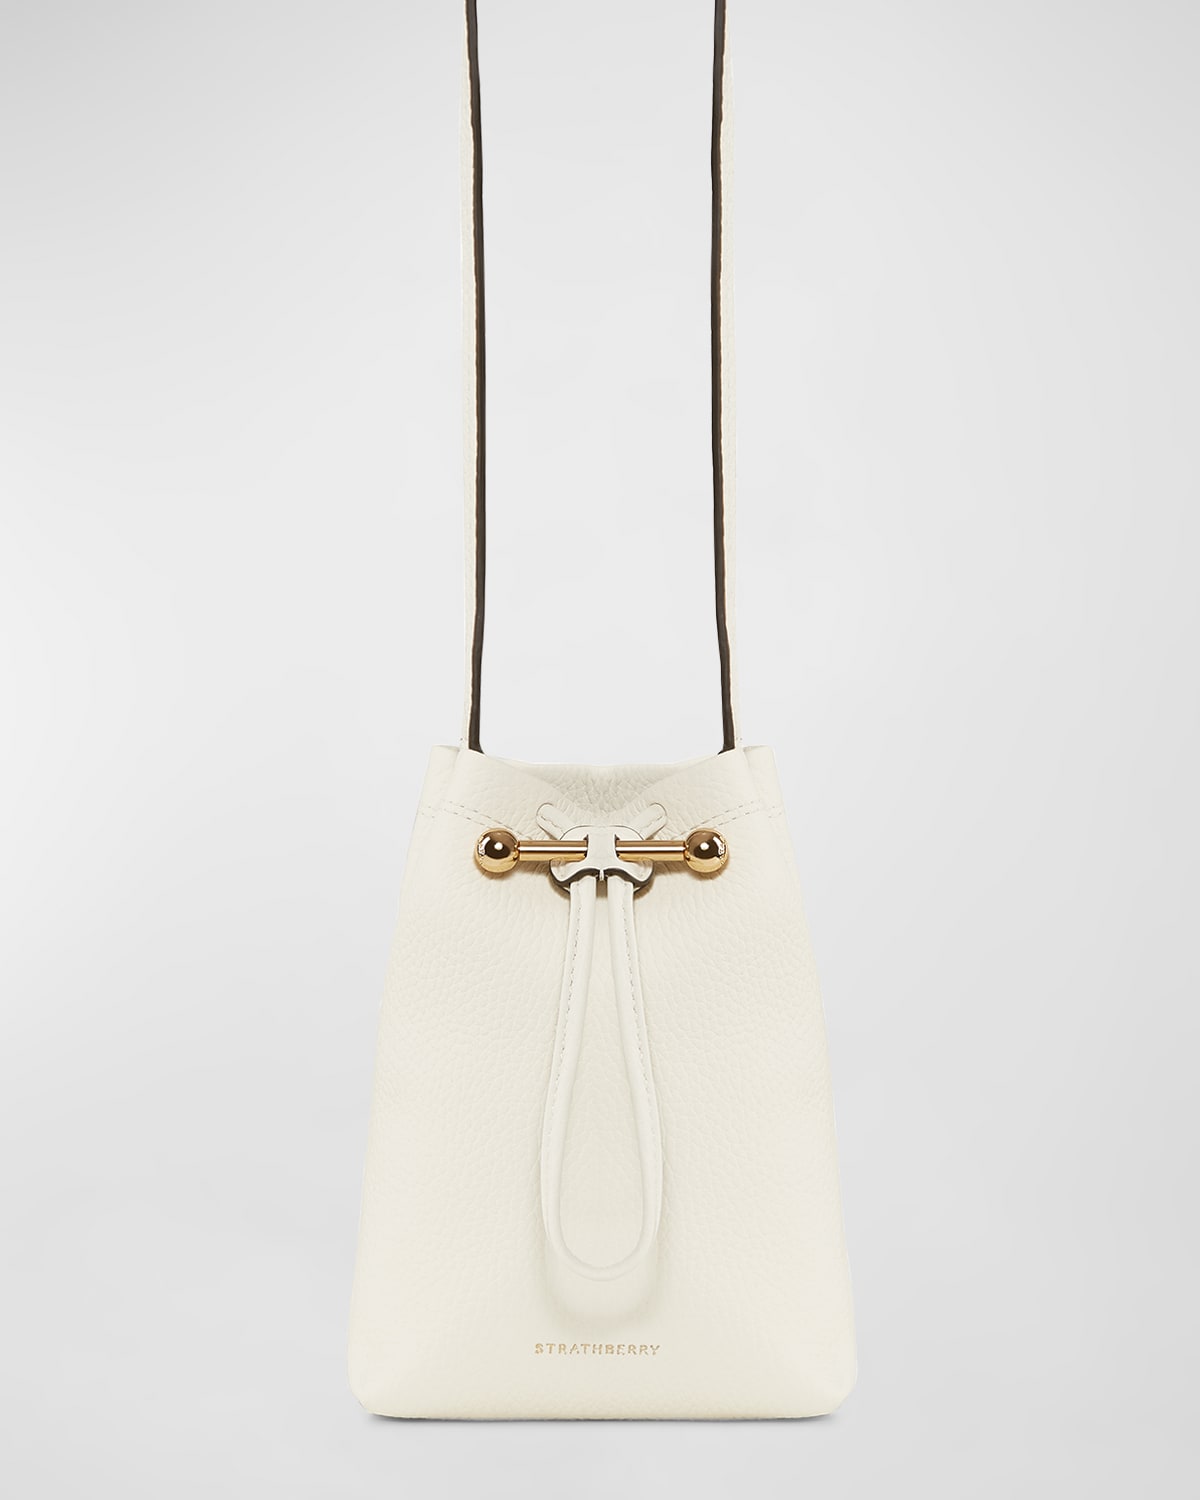 Strathberry Lana Osette Leather Bucket Bag in Natural